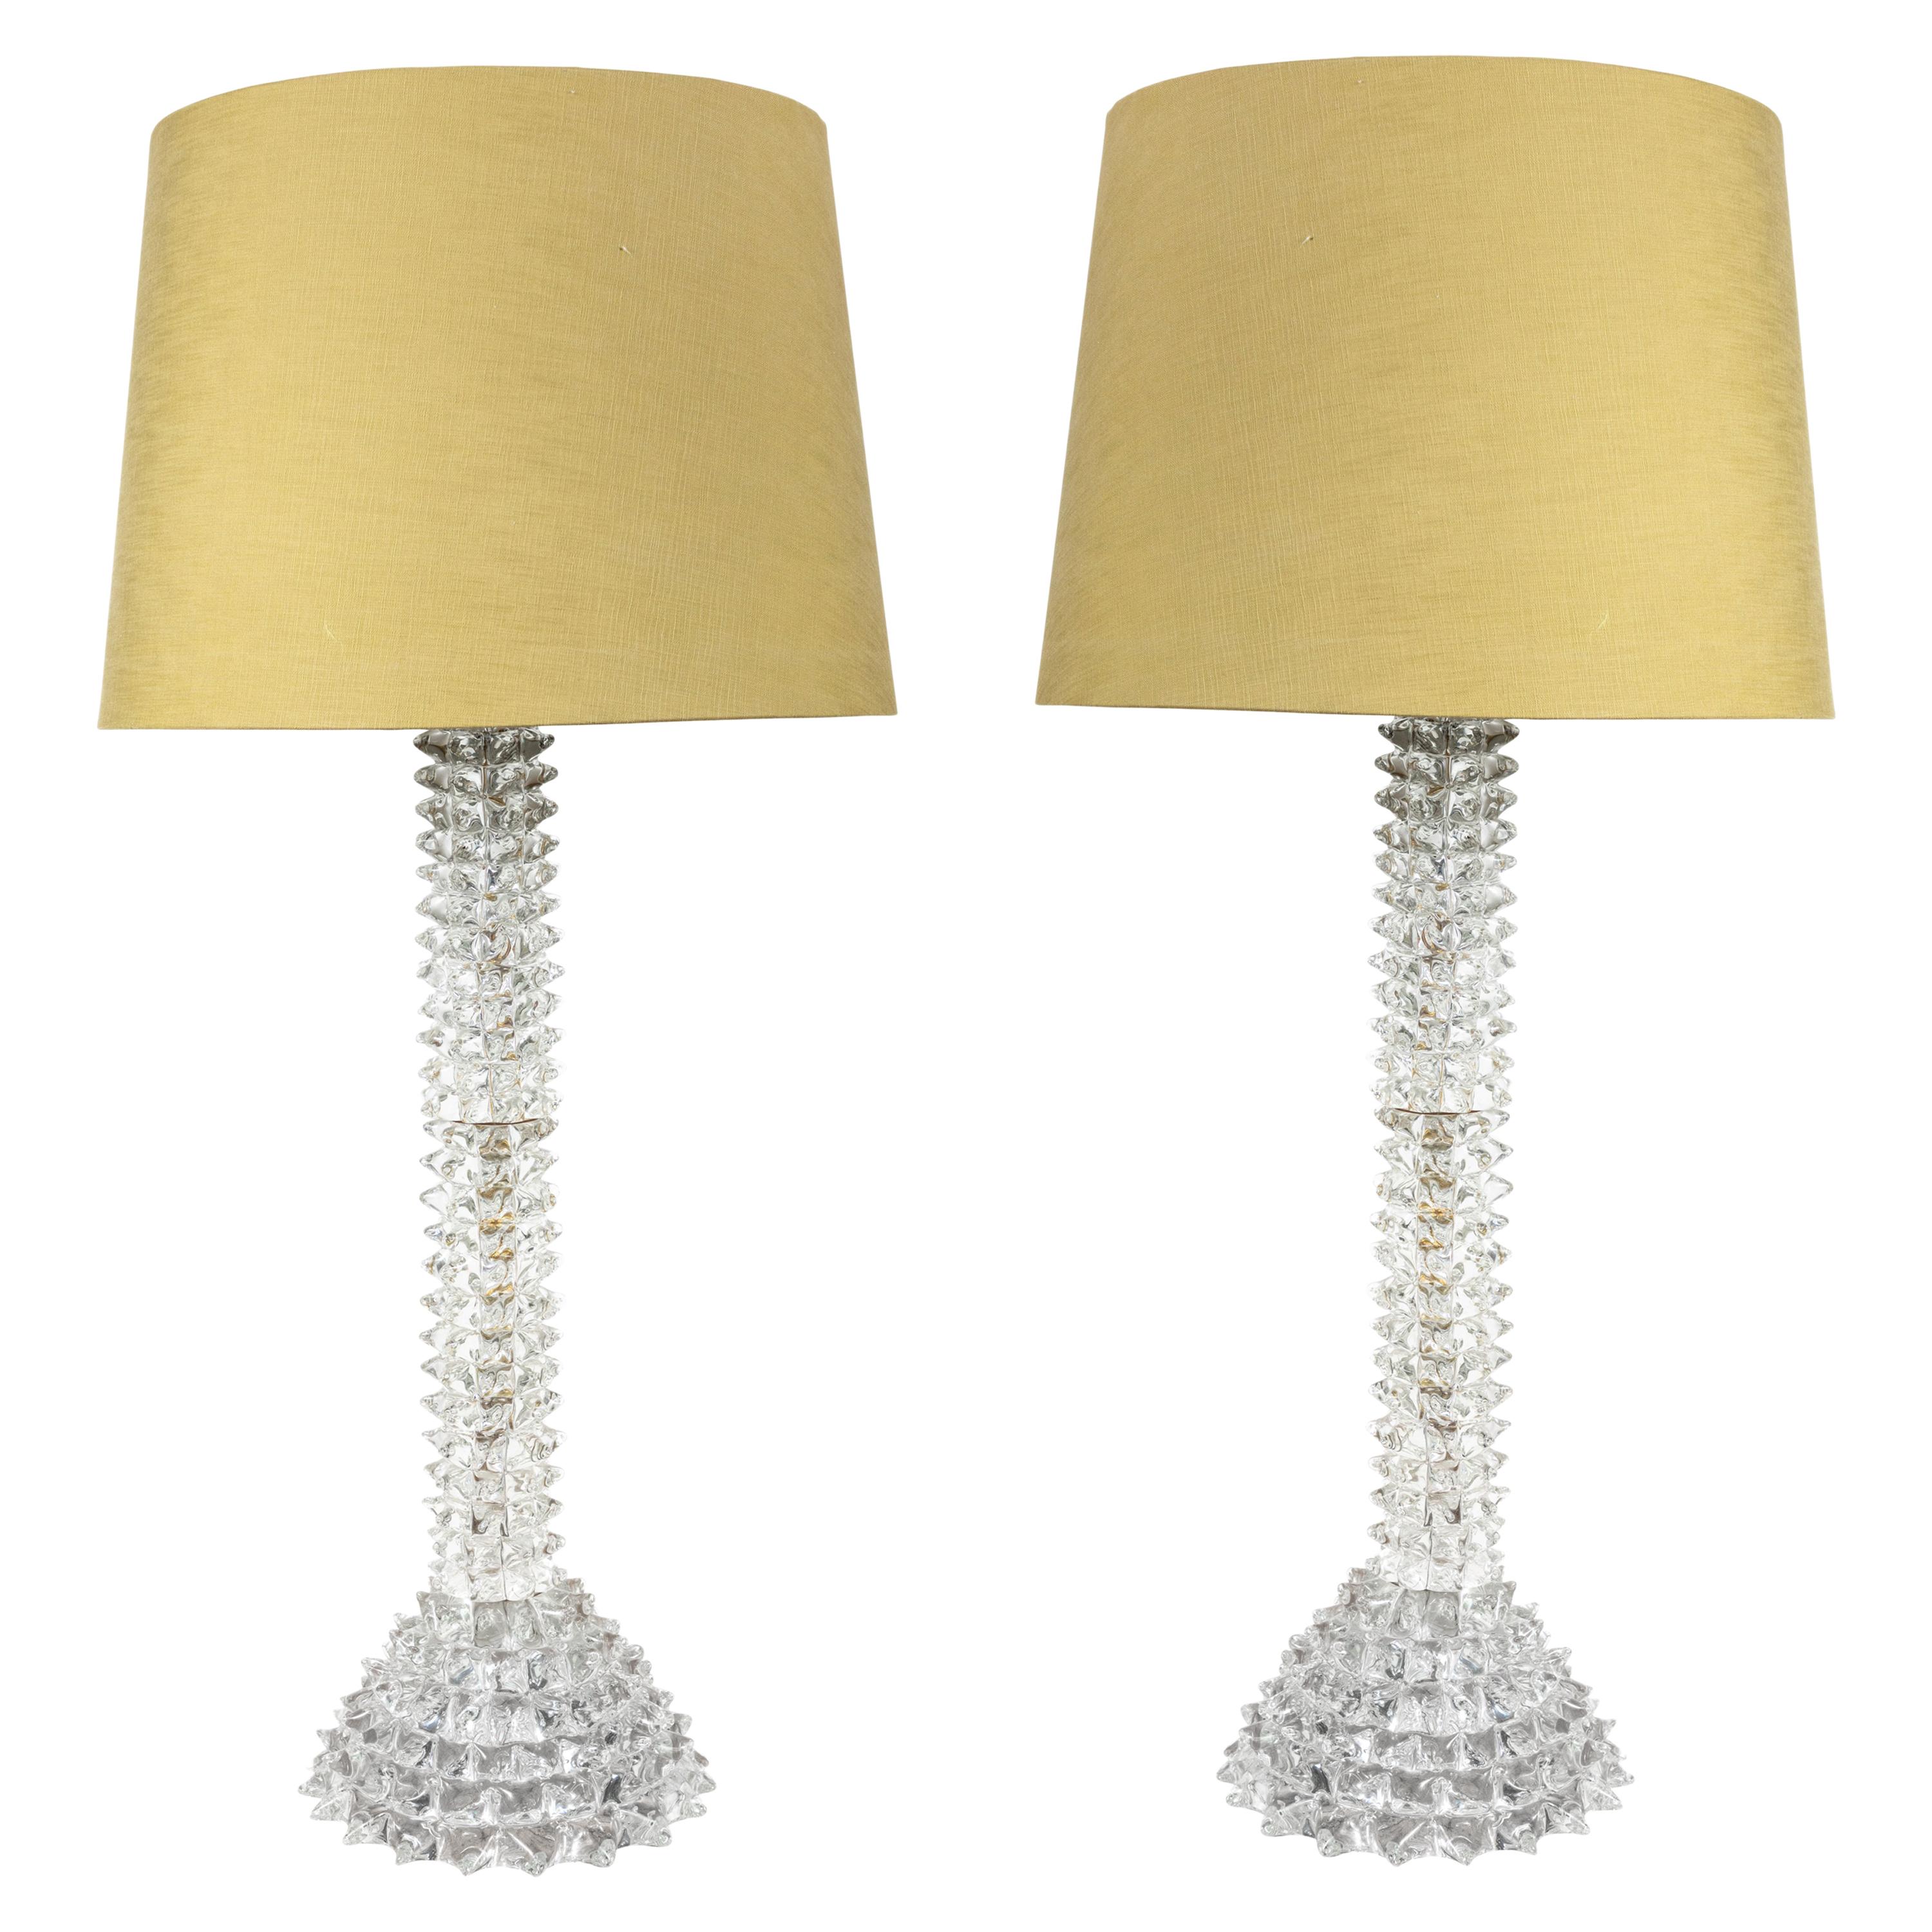 Midcentury, Spiked, Murano Glass Lamps